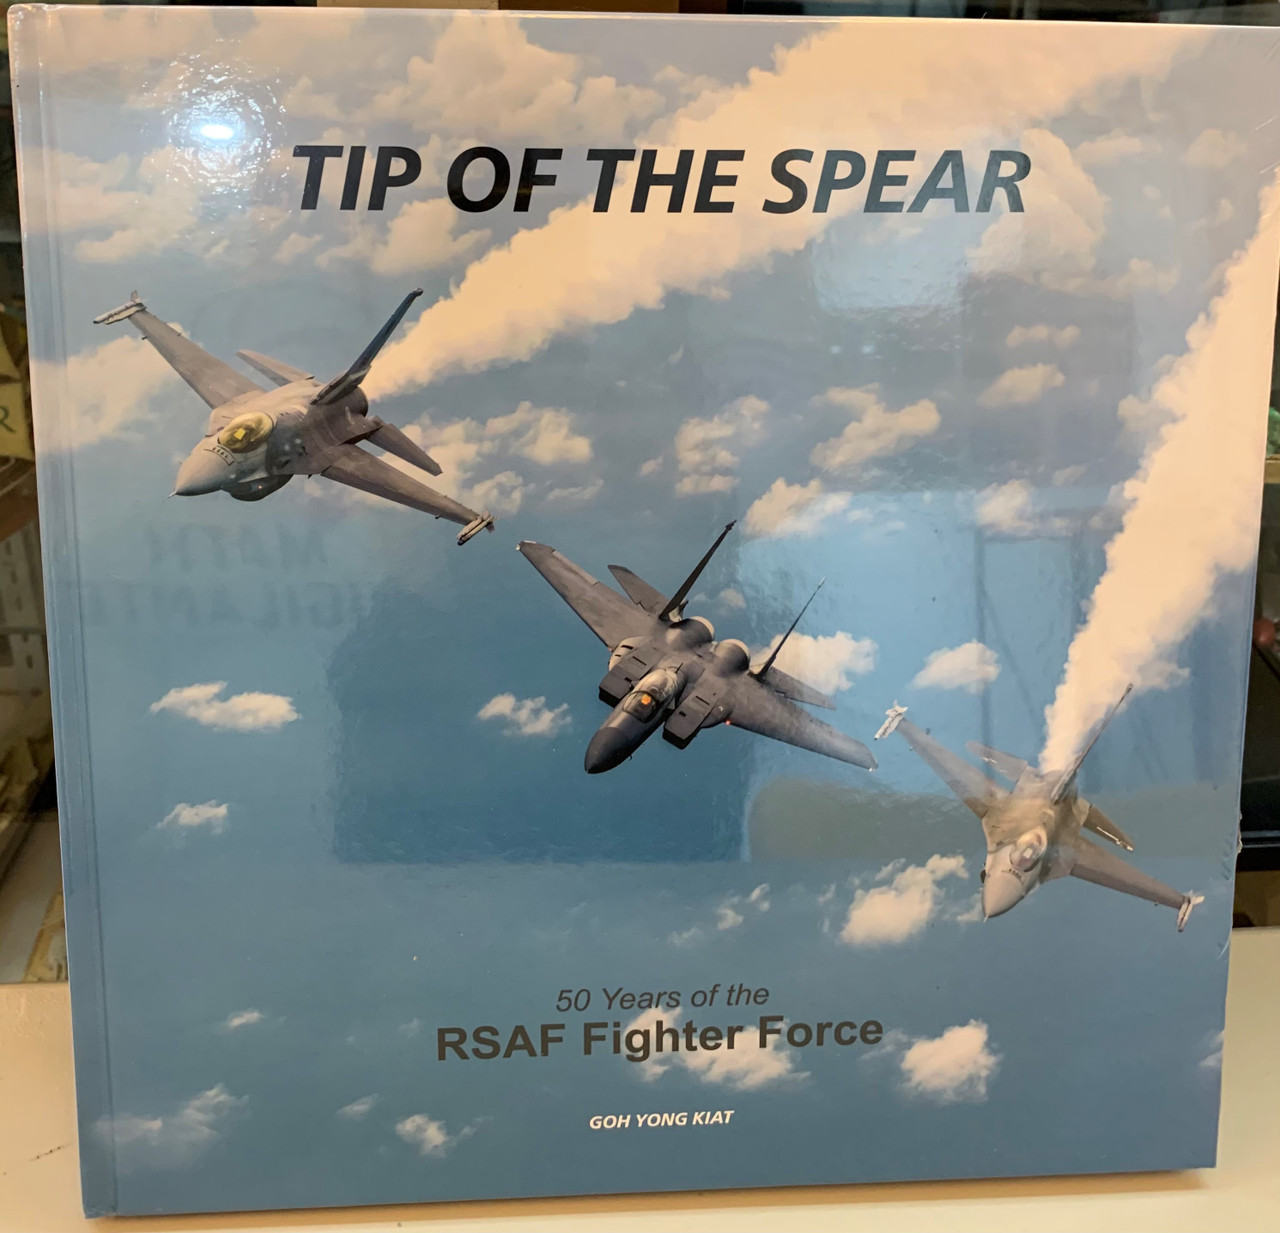 Tip Of The Spear - 50 years of the RSAF Fighter Force